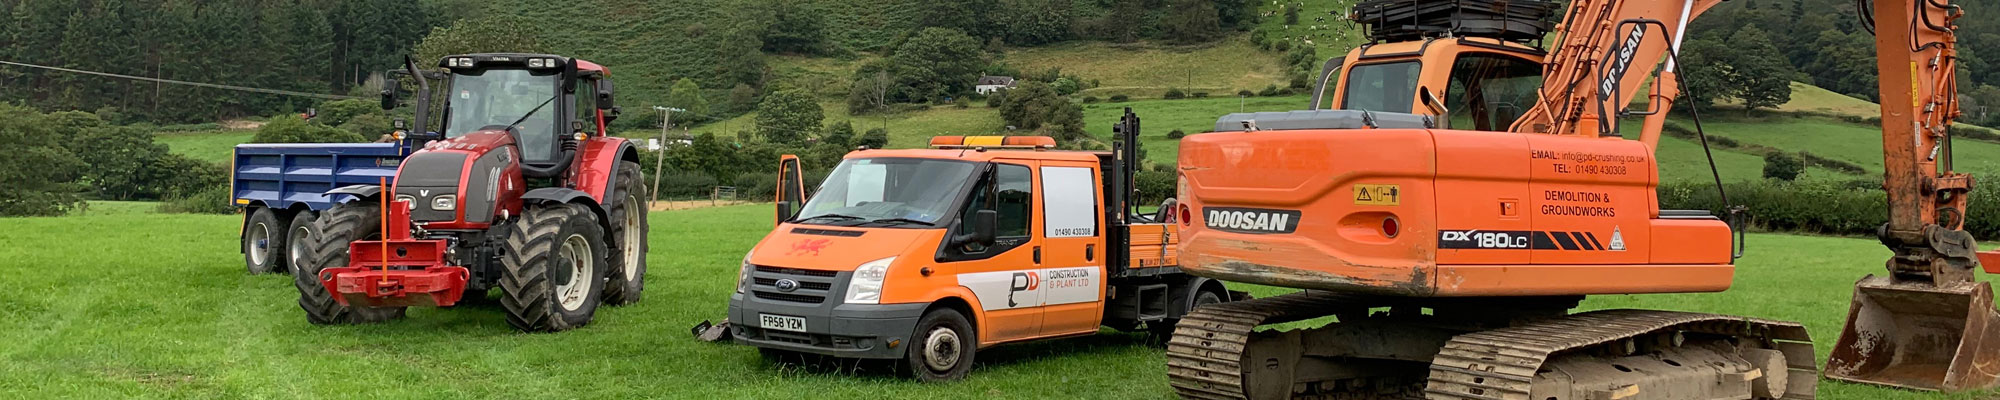 Groundworks equipment in North Wales